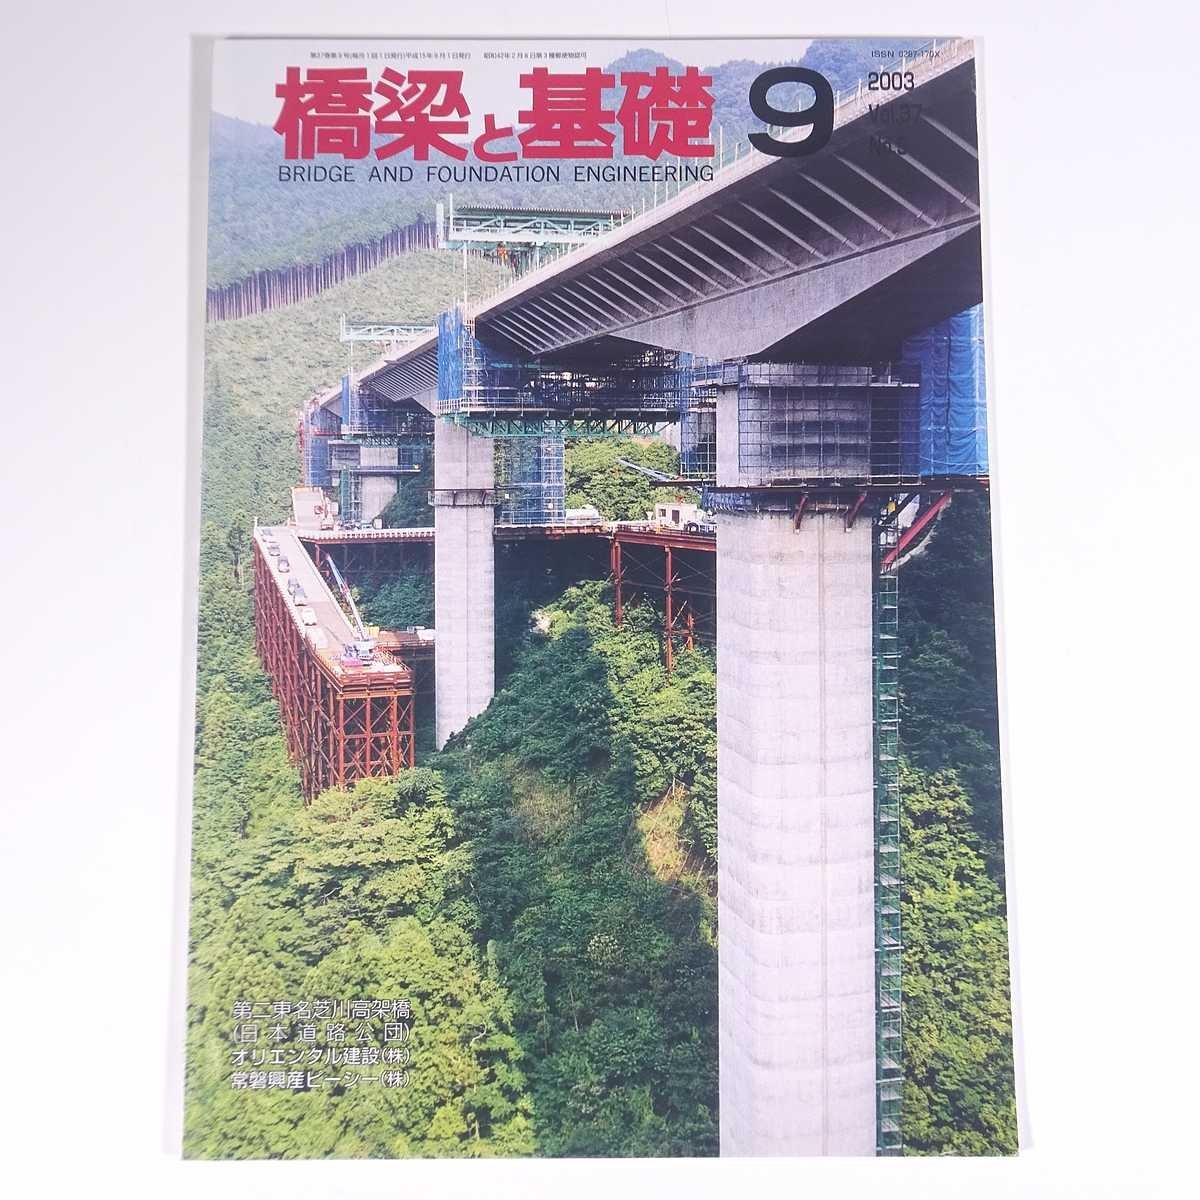 ... base 2003/9 corporation construction books magazine physics engineering industry public works construction cover * second Tomei lawn grass river height ../ Japan road ../olientaru construction another 